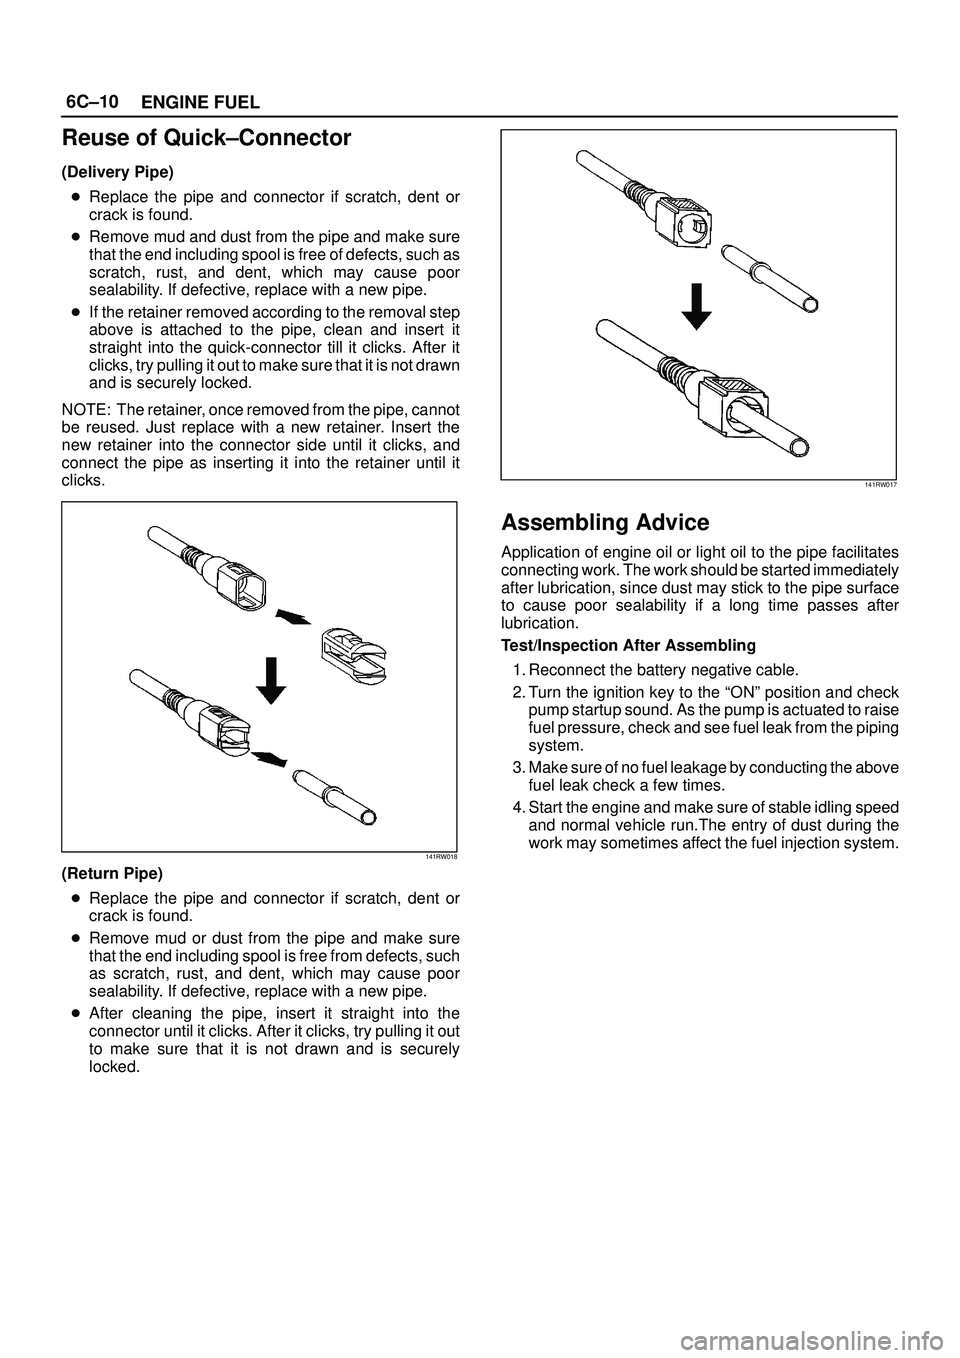 ISUZU TROOPER 1998  Service User Guide 6C±10
ENGINE FUEL
Reuse of Quick±Connector
(Delivery Pipe)
Replace the pipe and connector if scratch, dent or
crack is found.
Remove mud and dust from the pipe and make sure
that the end including